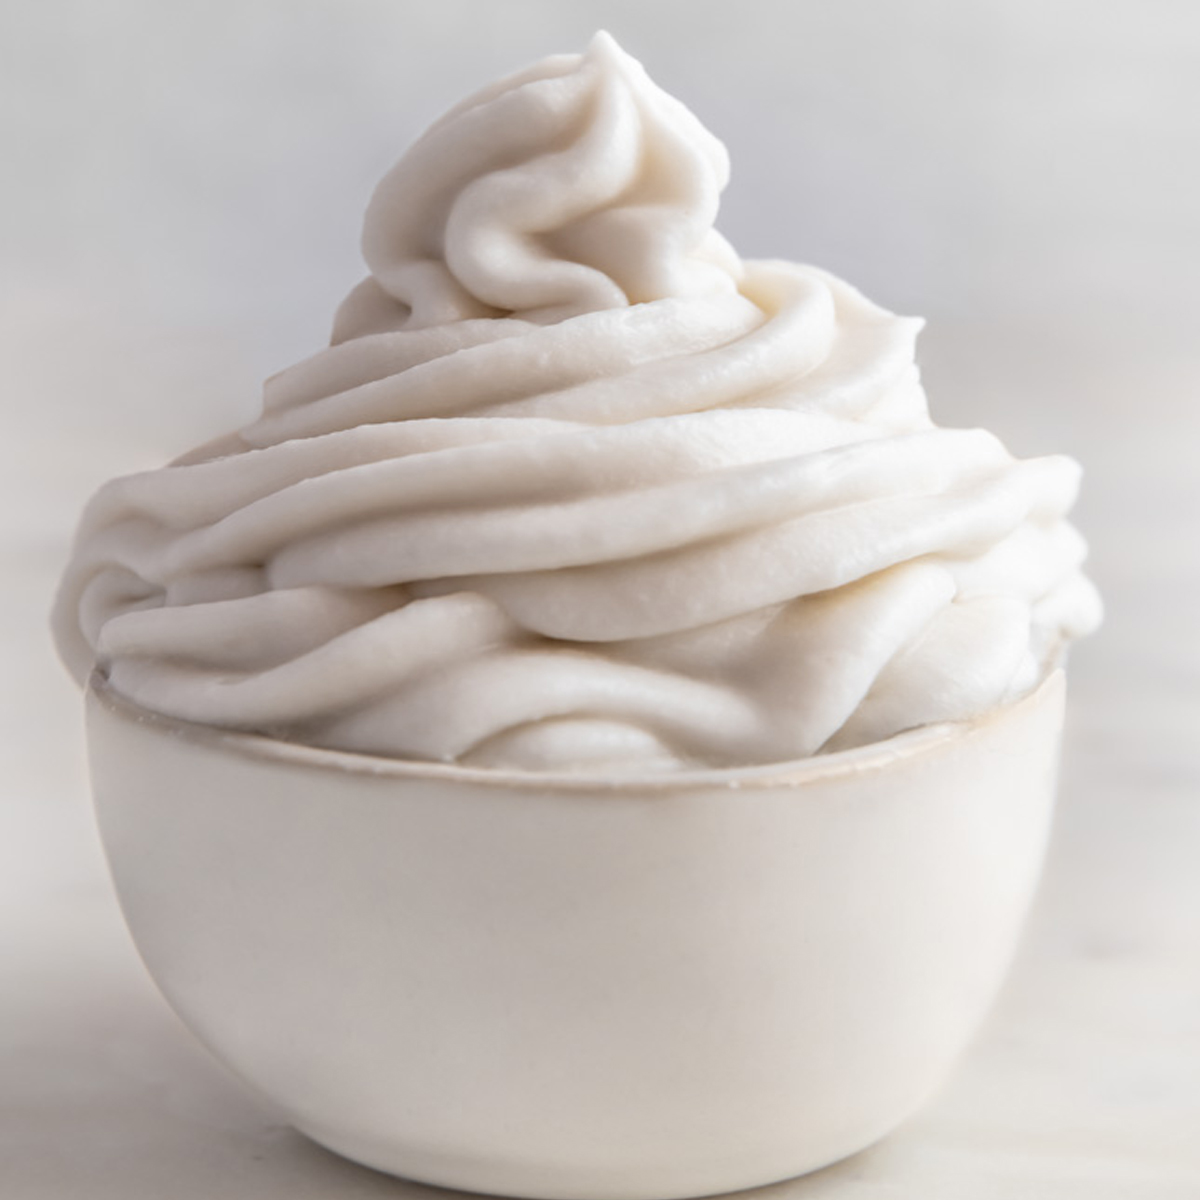 Coconut-Whipped-Cream